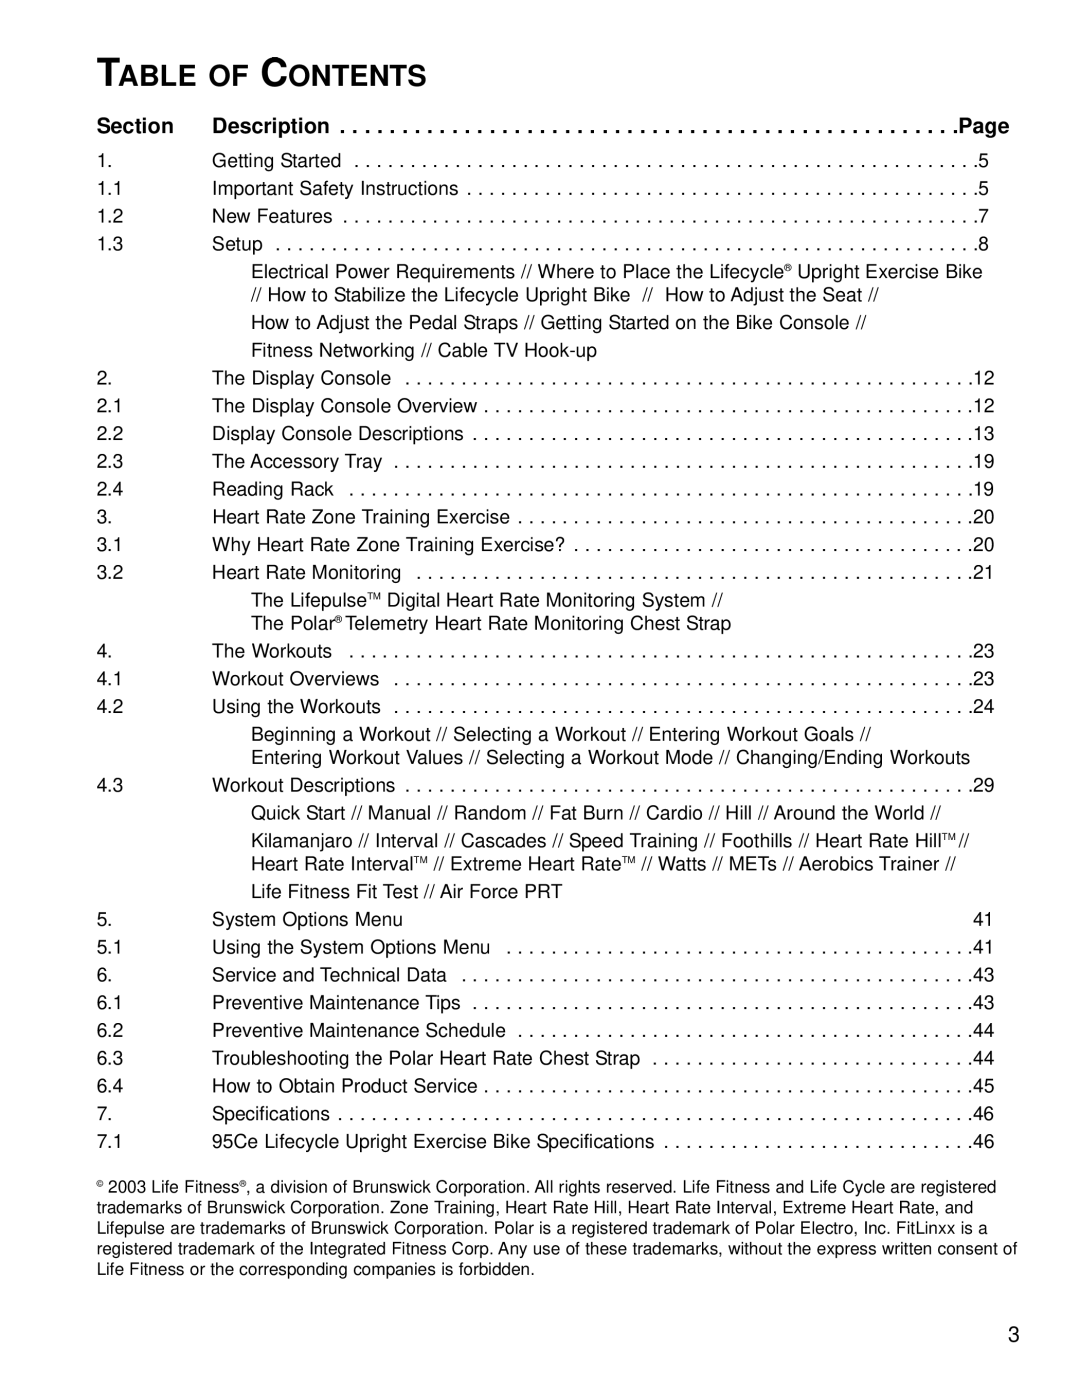 Life Fitness 95CE operation manual Table Of Contents, Section, Description, Page 